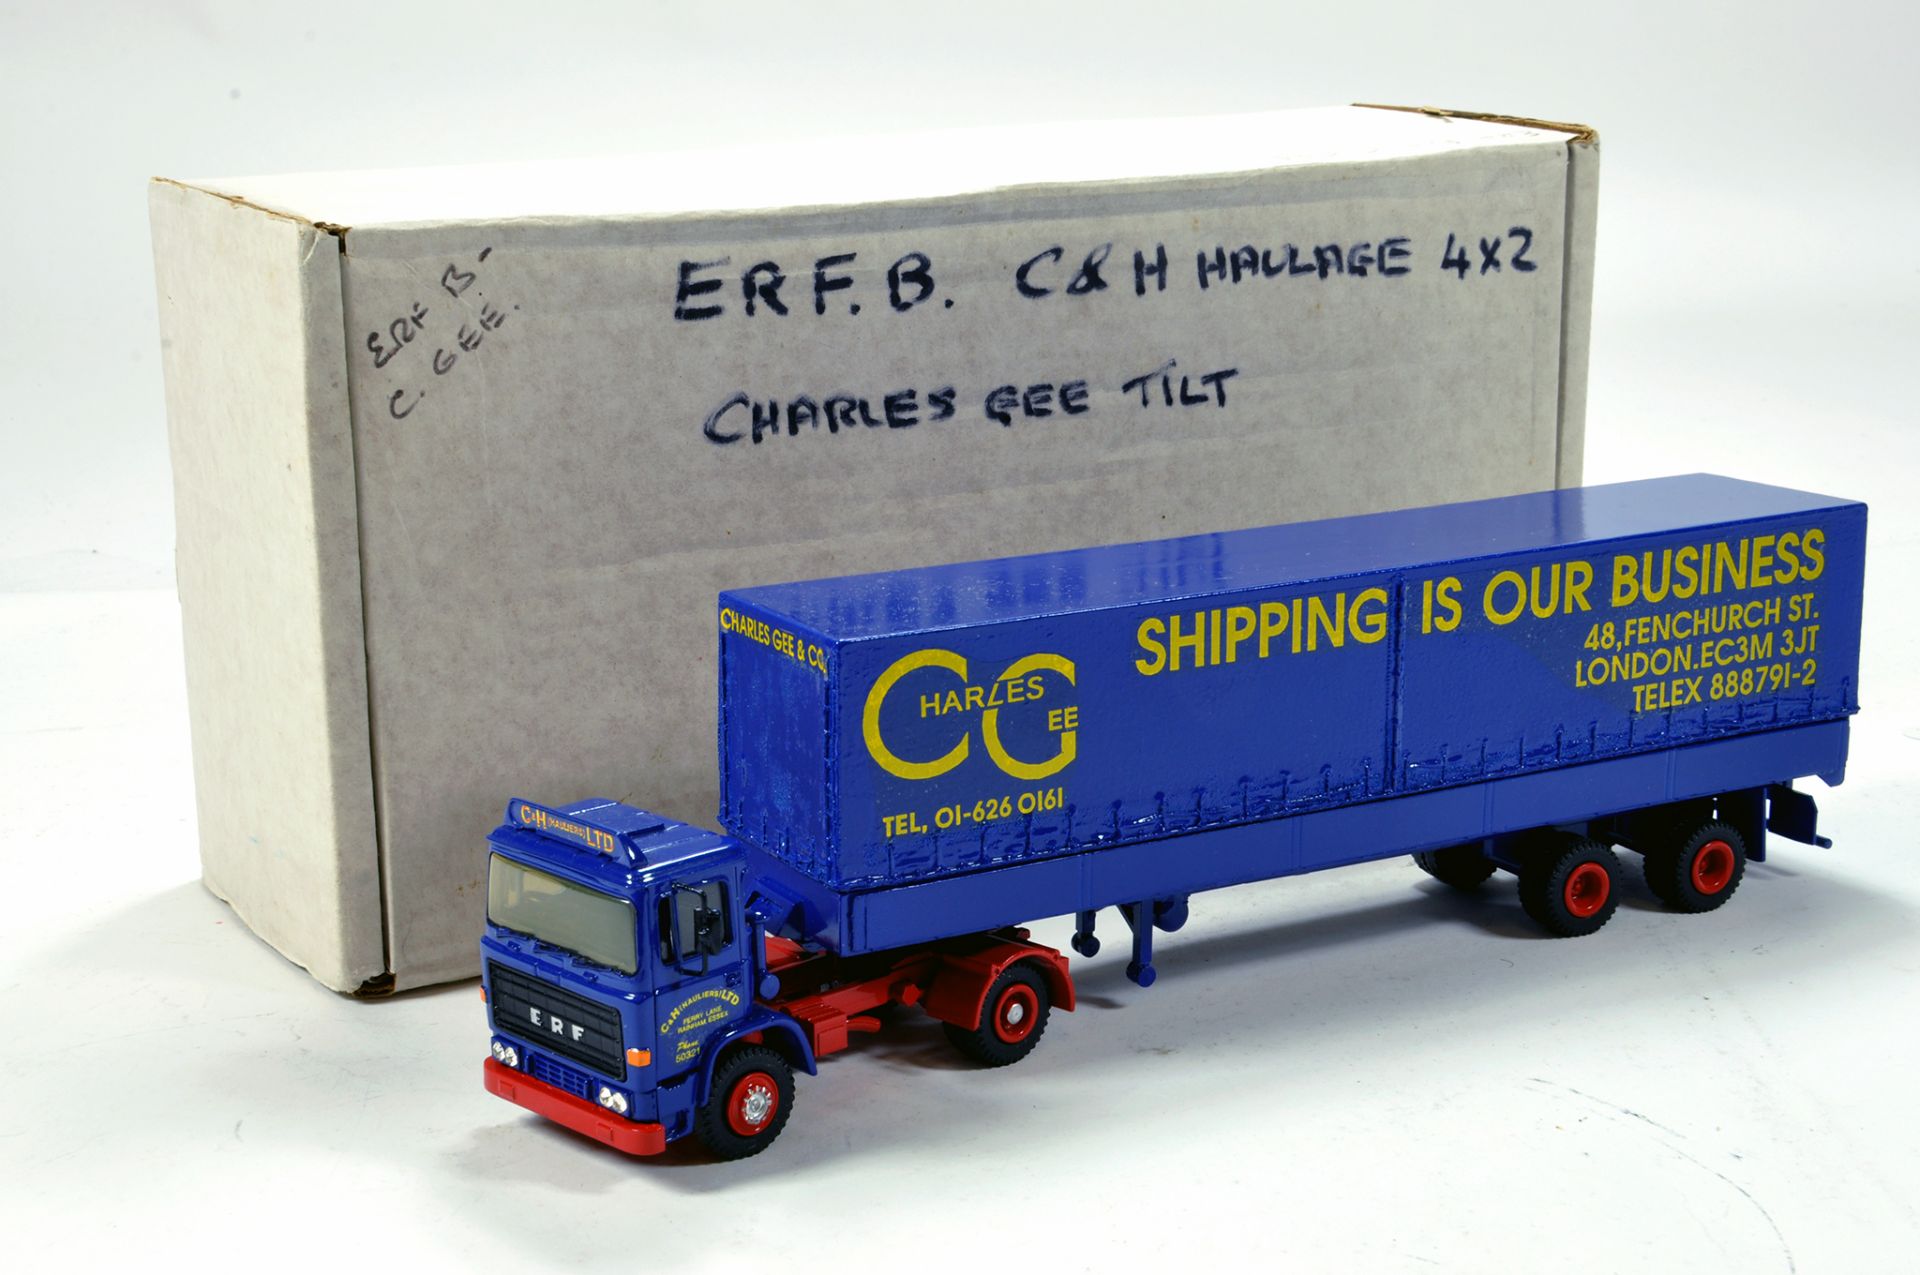 Alan Smith Auto Models ASAM 1/48 Truck issue comprising ERF Tilt Trailer in livery of Charles Gee.